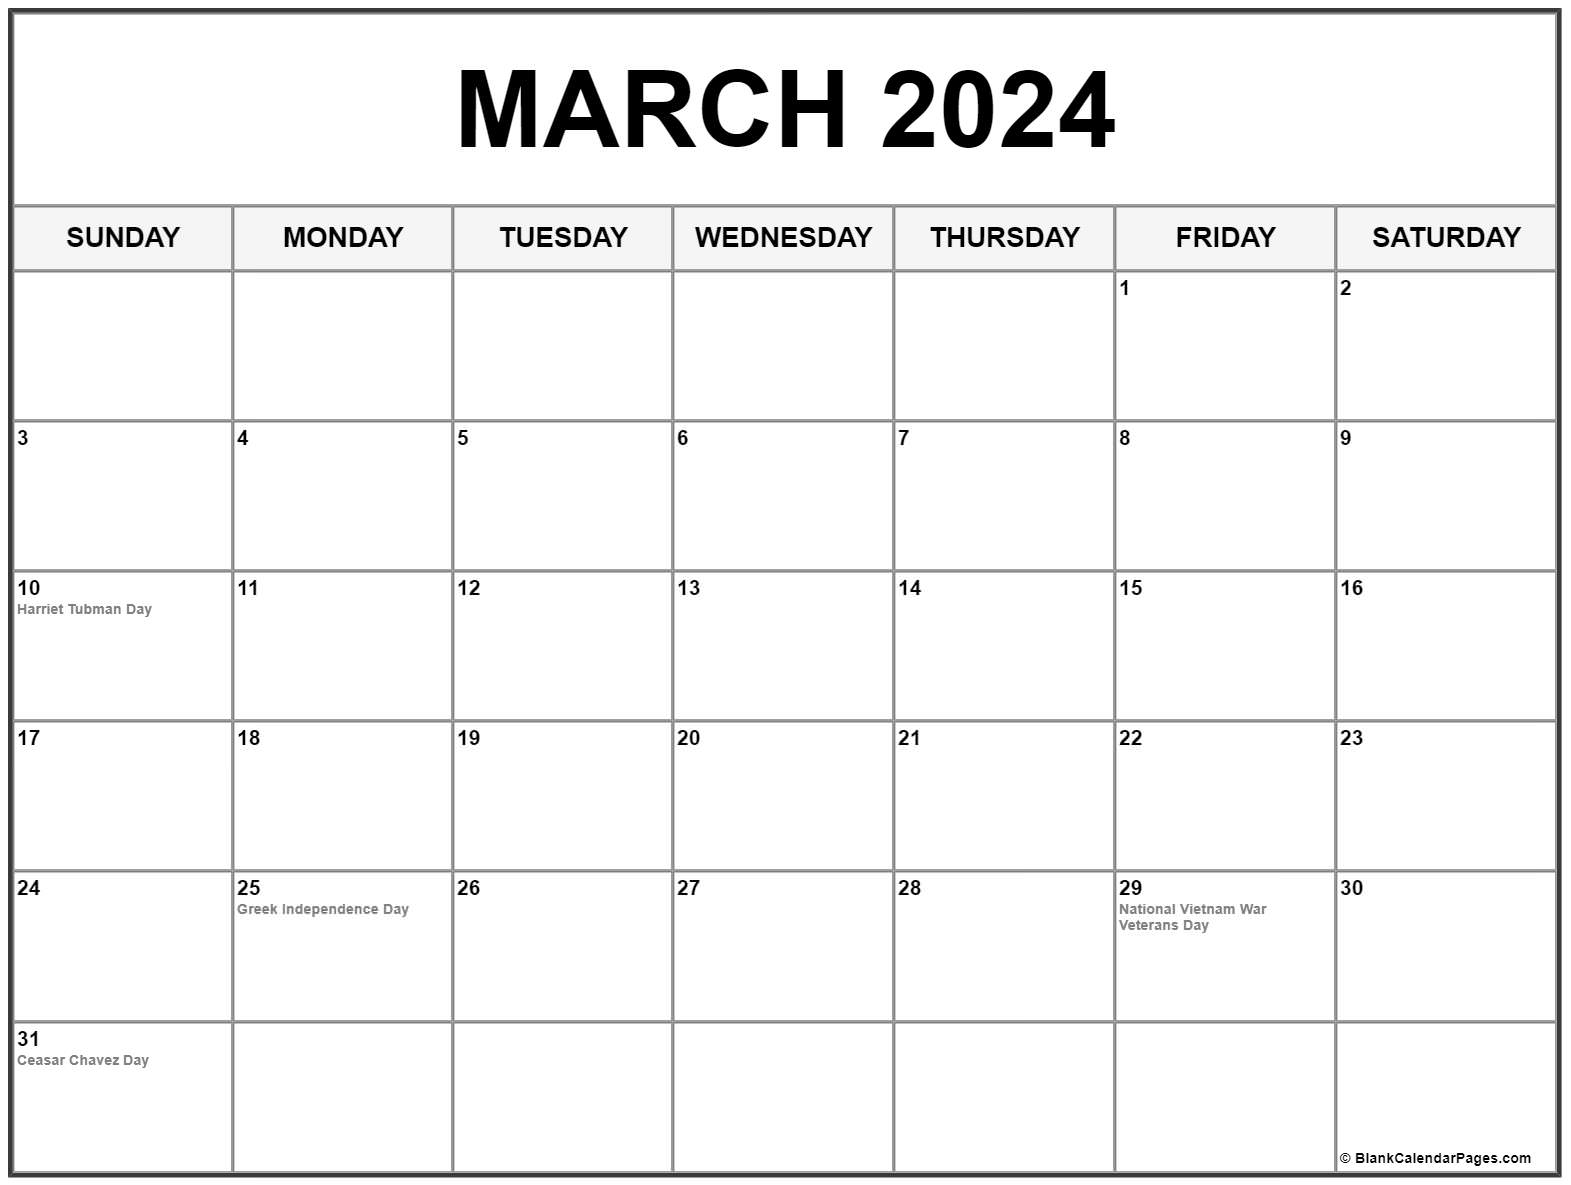 fiscal-year-2024-calendar-with-holidays-new-perfect-most-popular